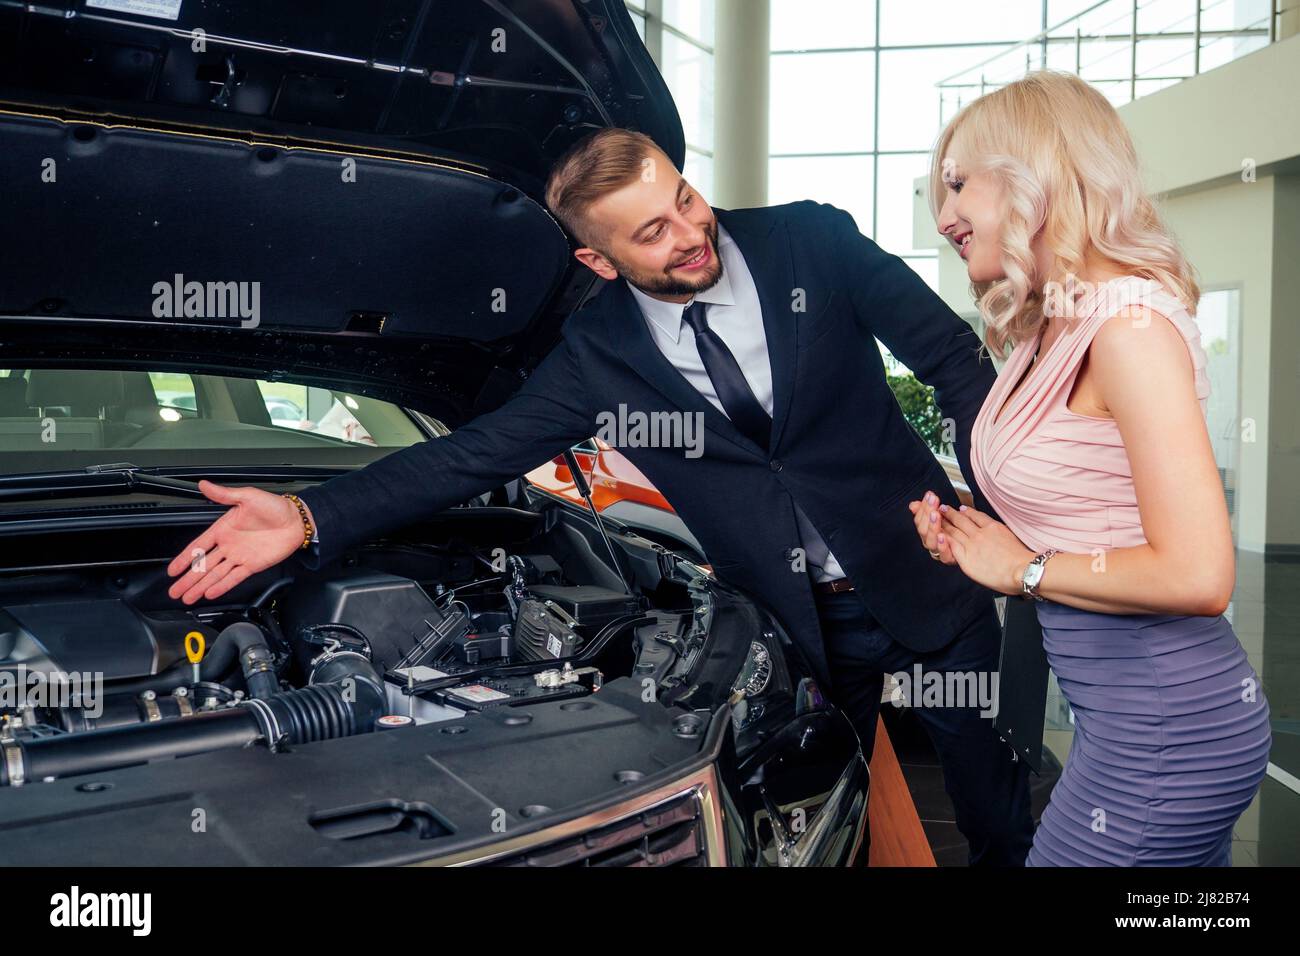 salesman in suit showing catalog to female blonde customer in dealership salon Stock Photo